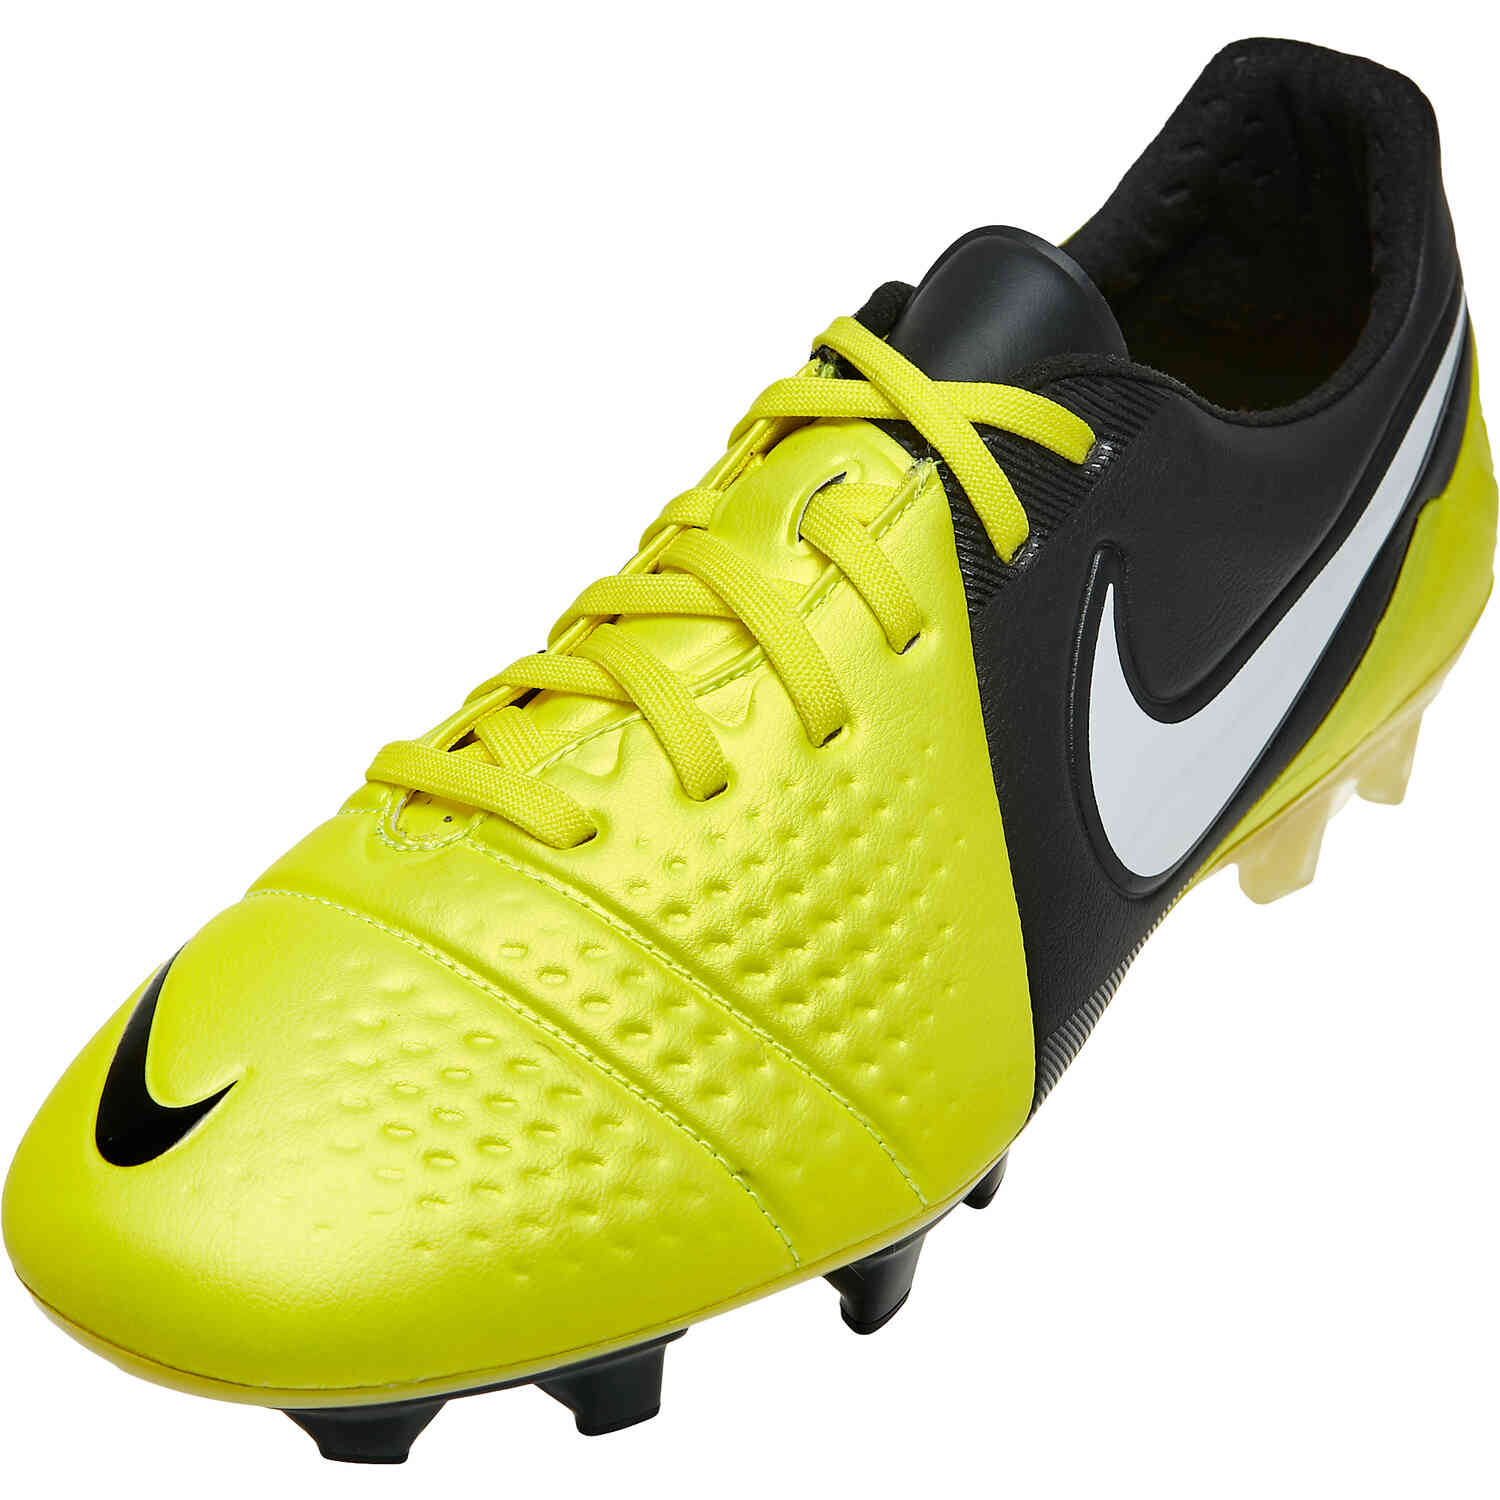 Toestemming Vlucht Professor Nike Special Edition CTR360 Maestri III FG - Tour Yellow & Black with White  - SoccerPro